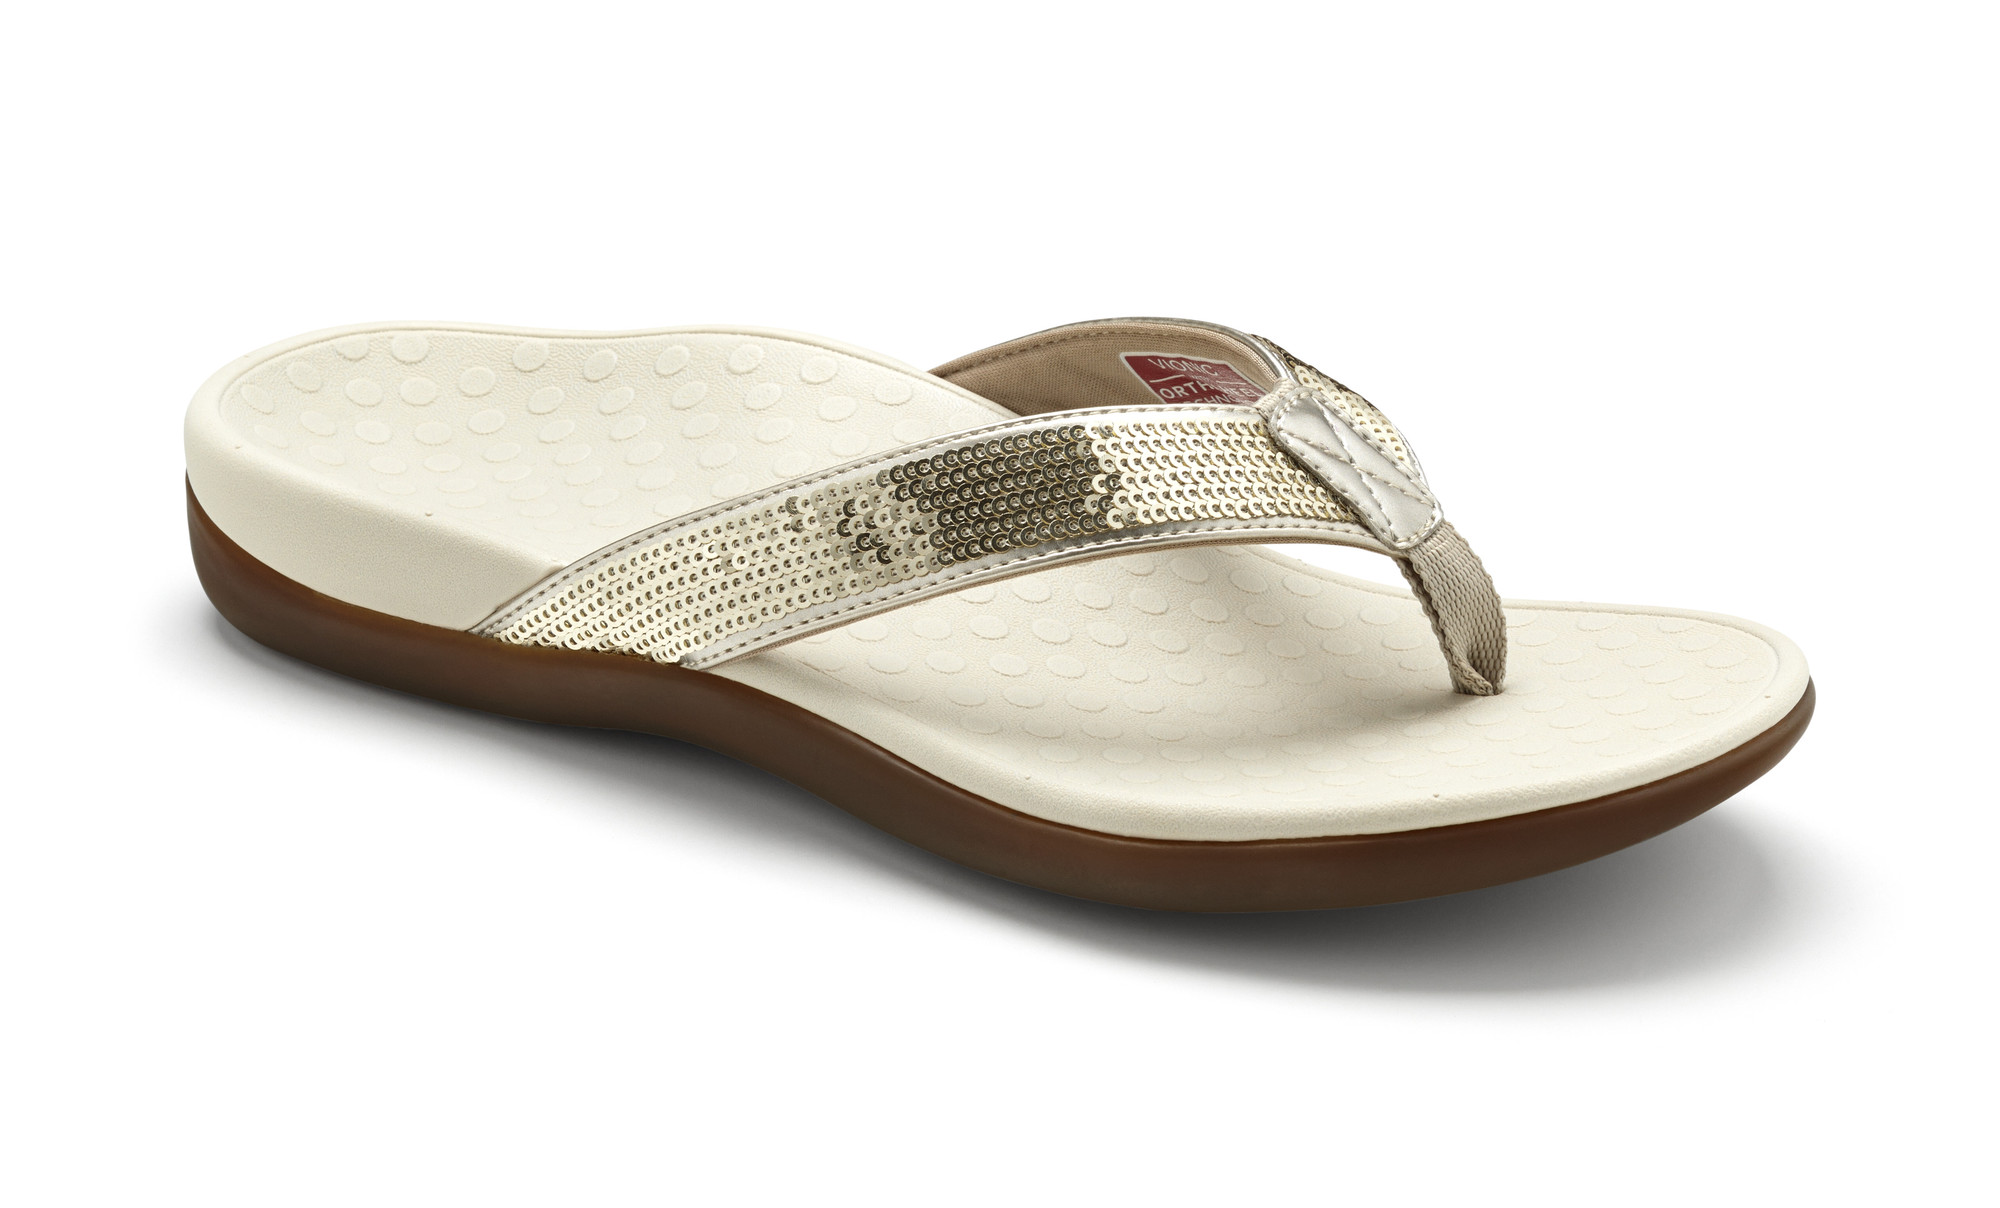 Your Aching Feet Will Thank You For These Sandals